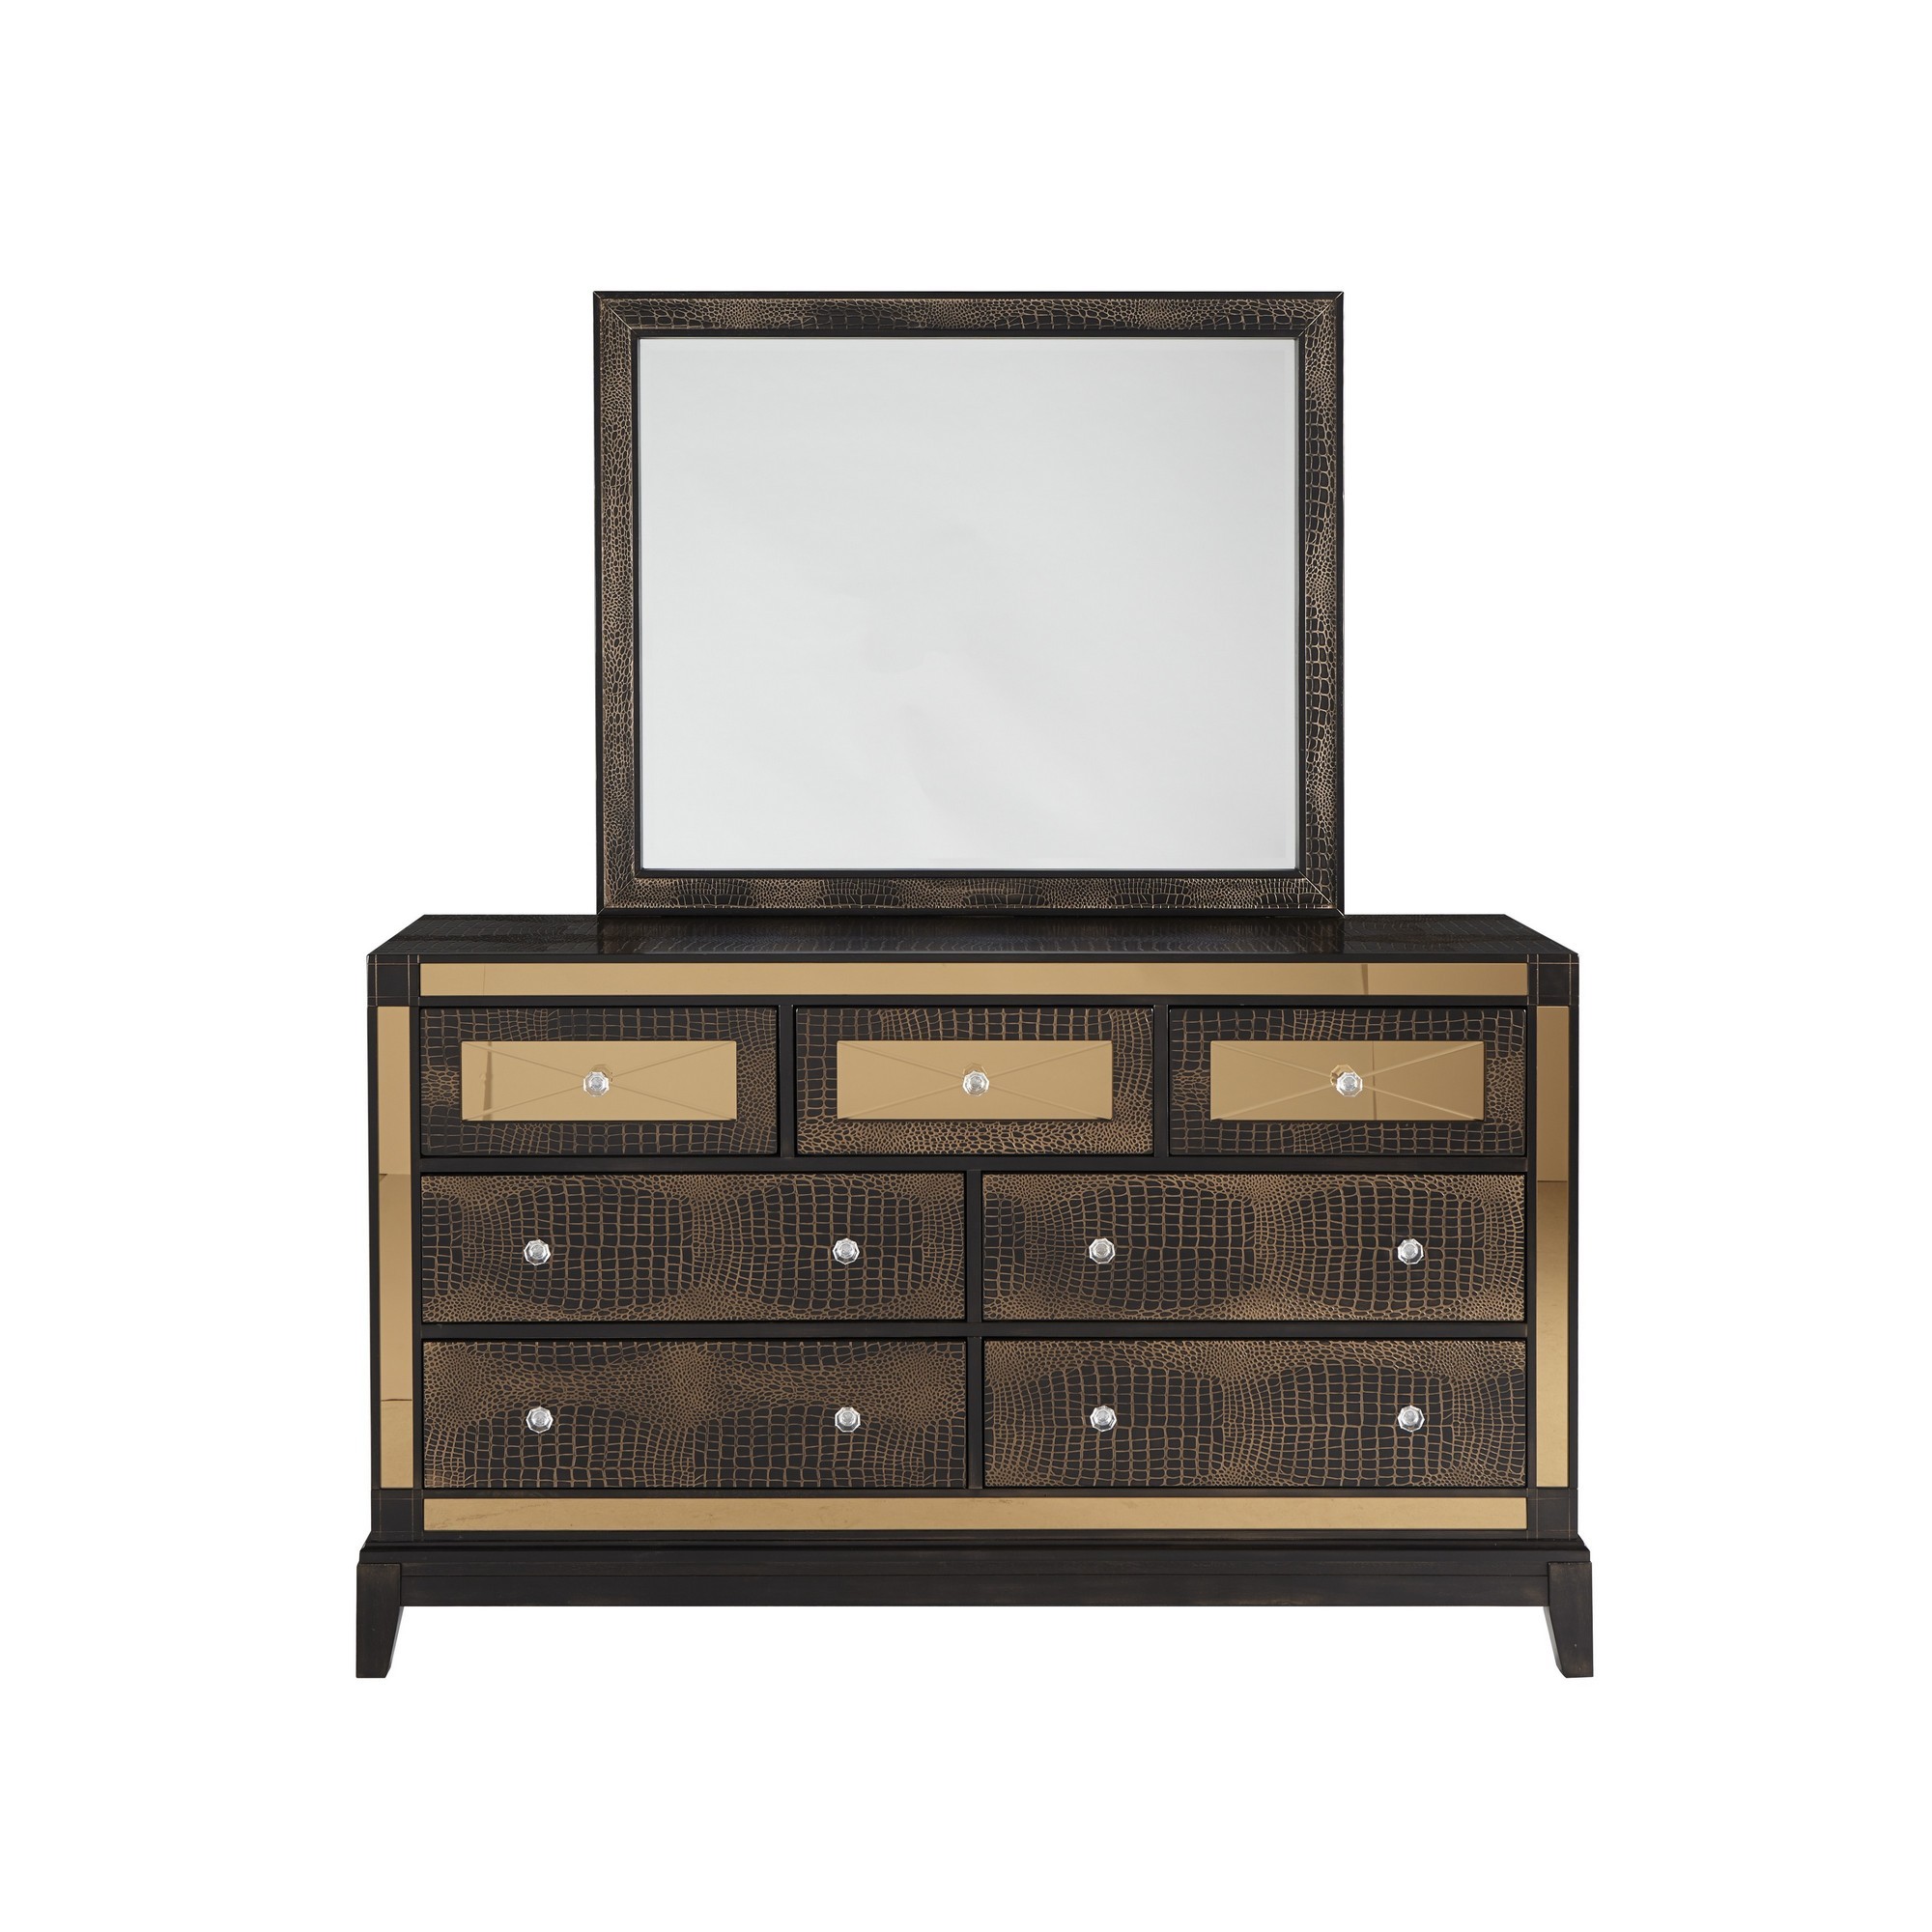 Chocolate Dresser with 7 Drawer Mirrored Accent